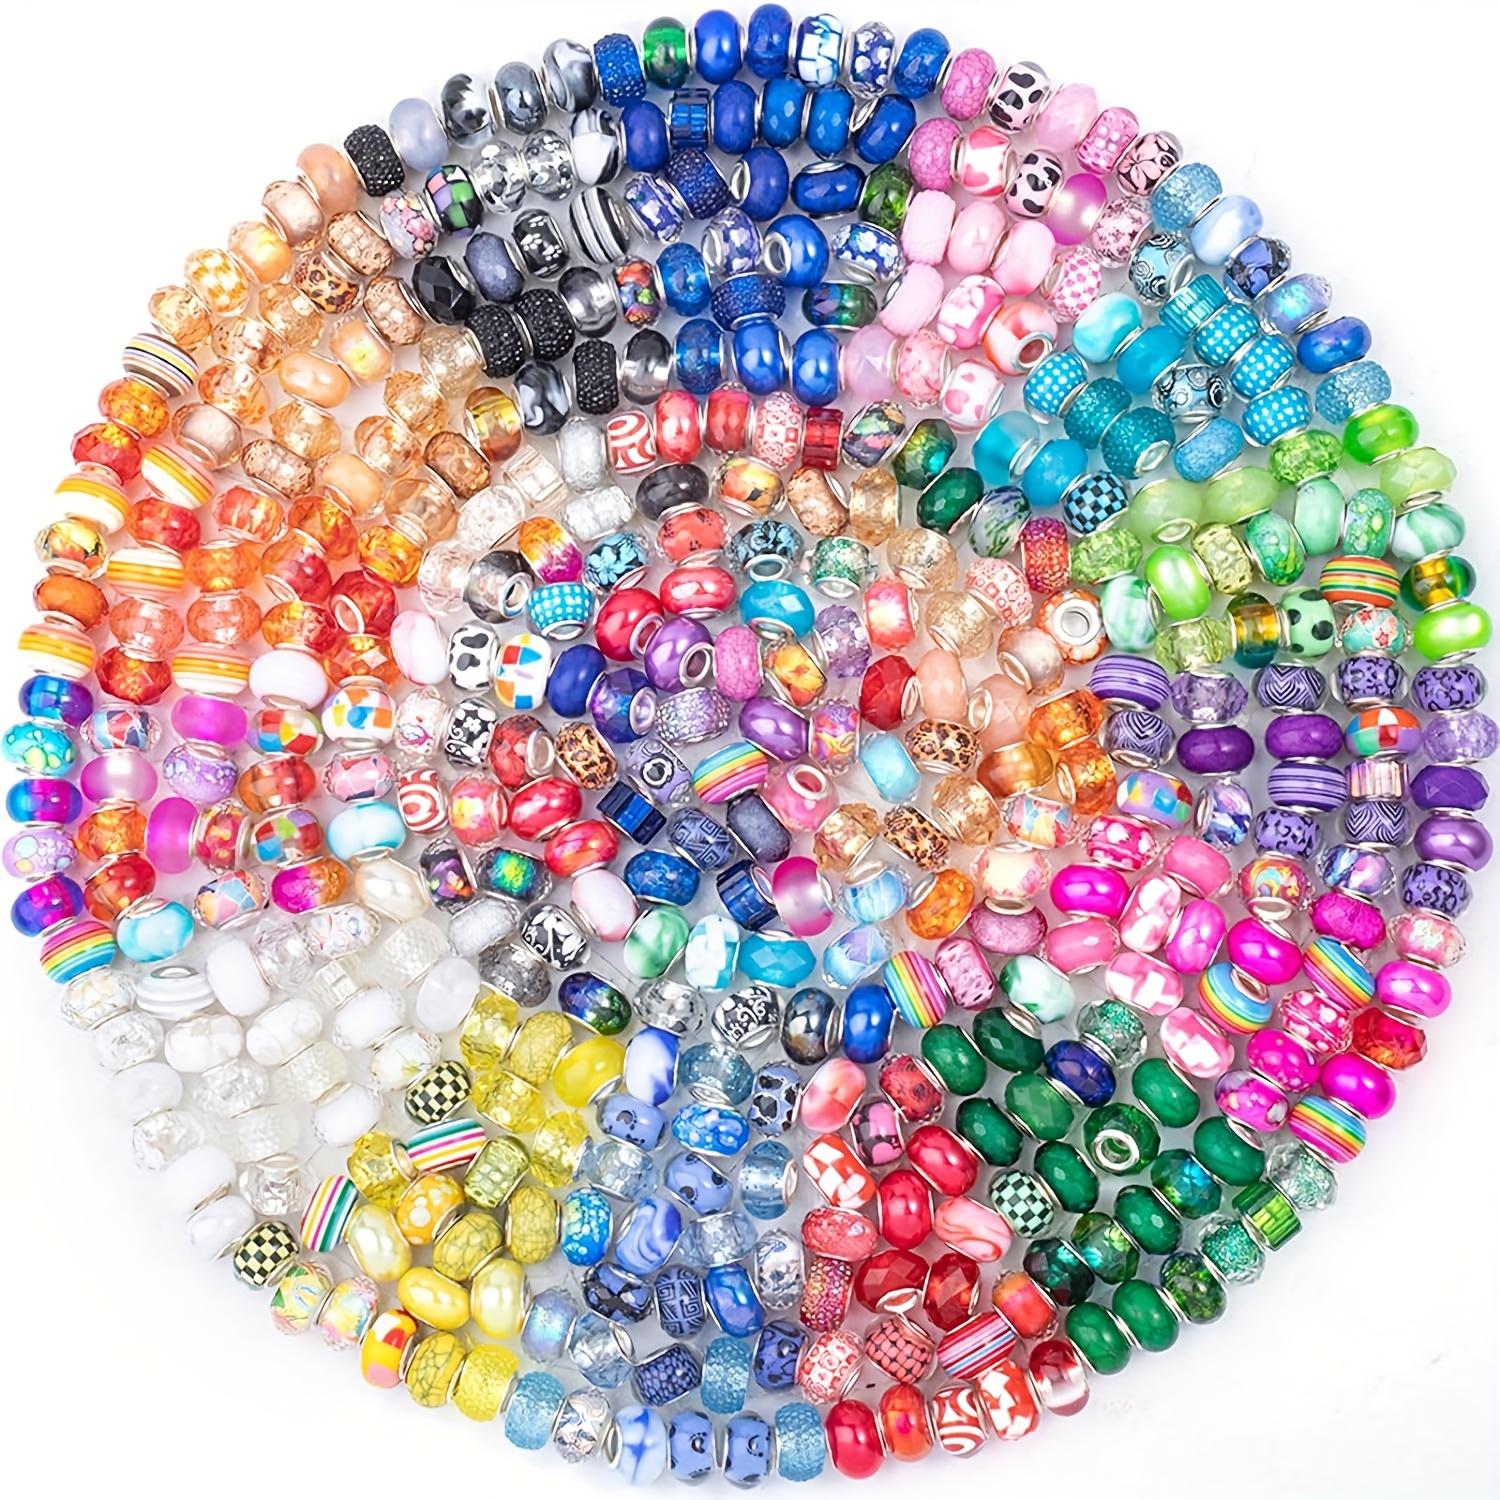 

100-piece Mixed Color Rhinestone Lampwork Beads Set - Large Hole Acrylic Spacer Beads For Diy Jewelry Making, Bracelets, Necklaces & Earrings Charms For Jewelry Making Beads For Jewelry Making